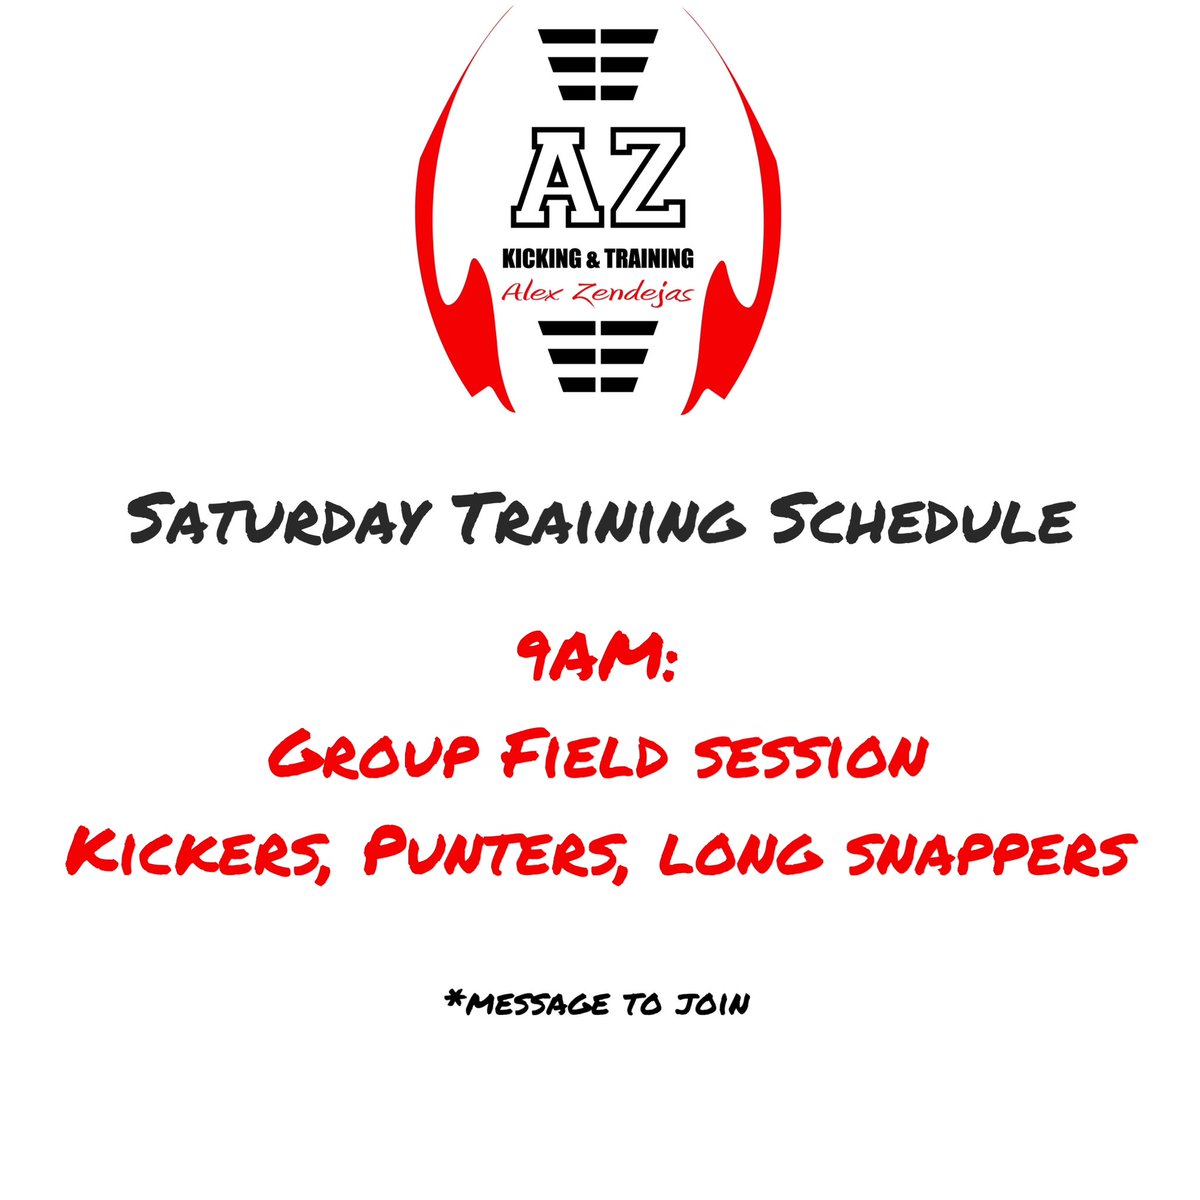 Saturday Training Schedule: . 9am: Group Field Session Kickers, Punters and Long Snappers . Message to join.